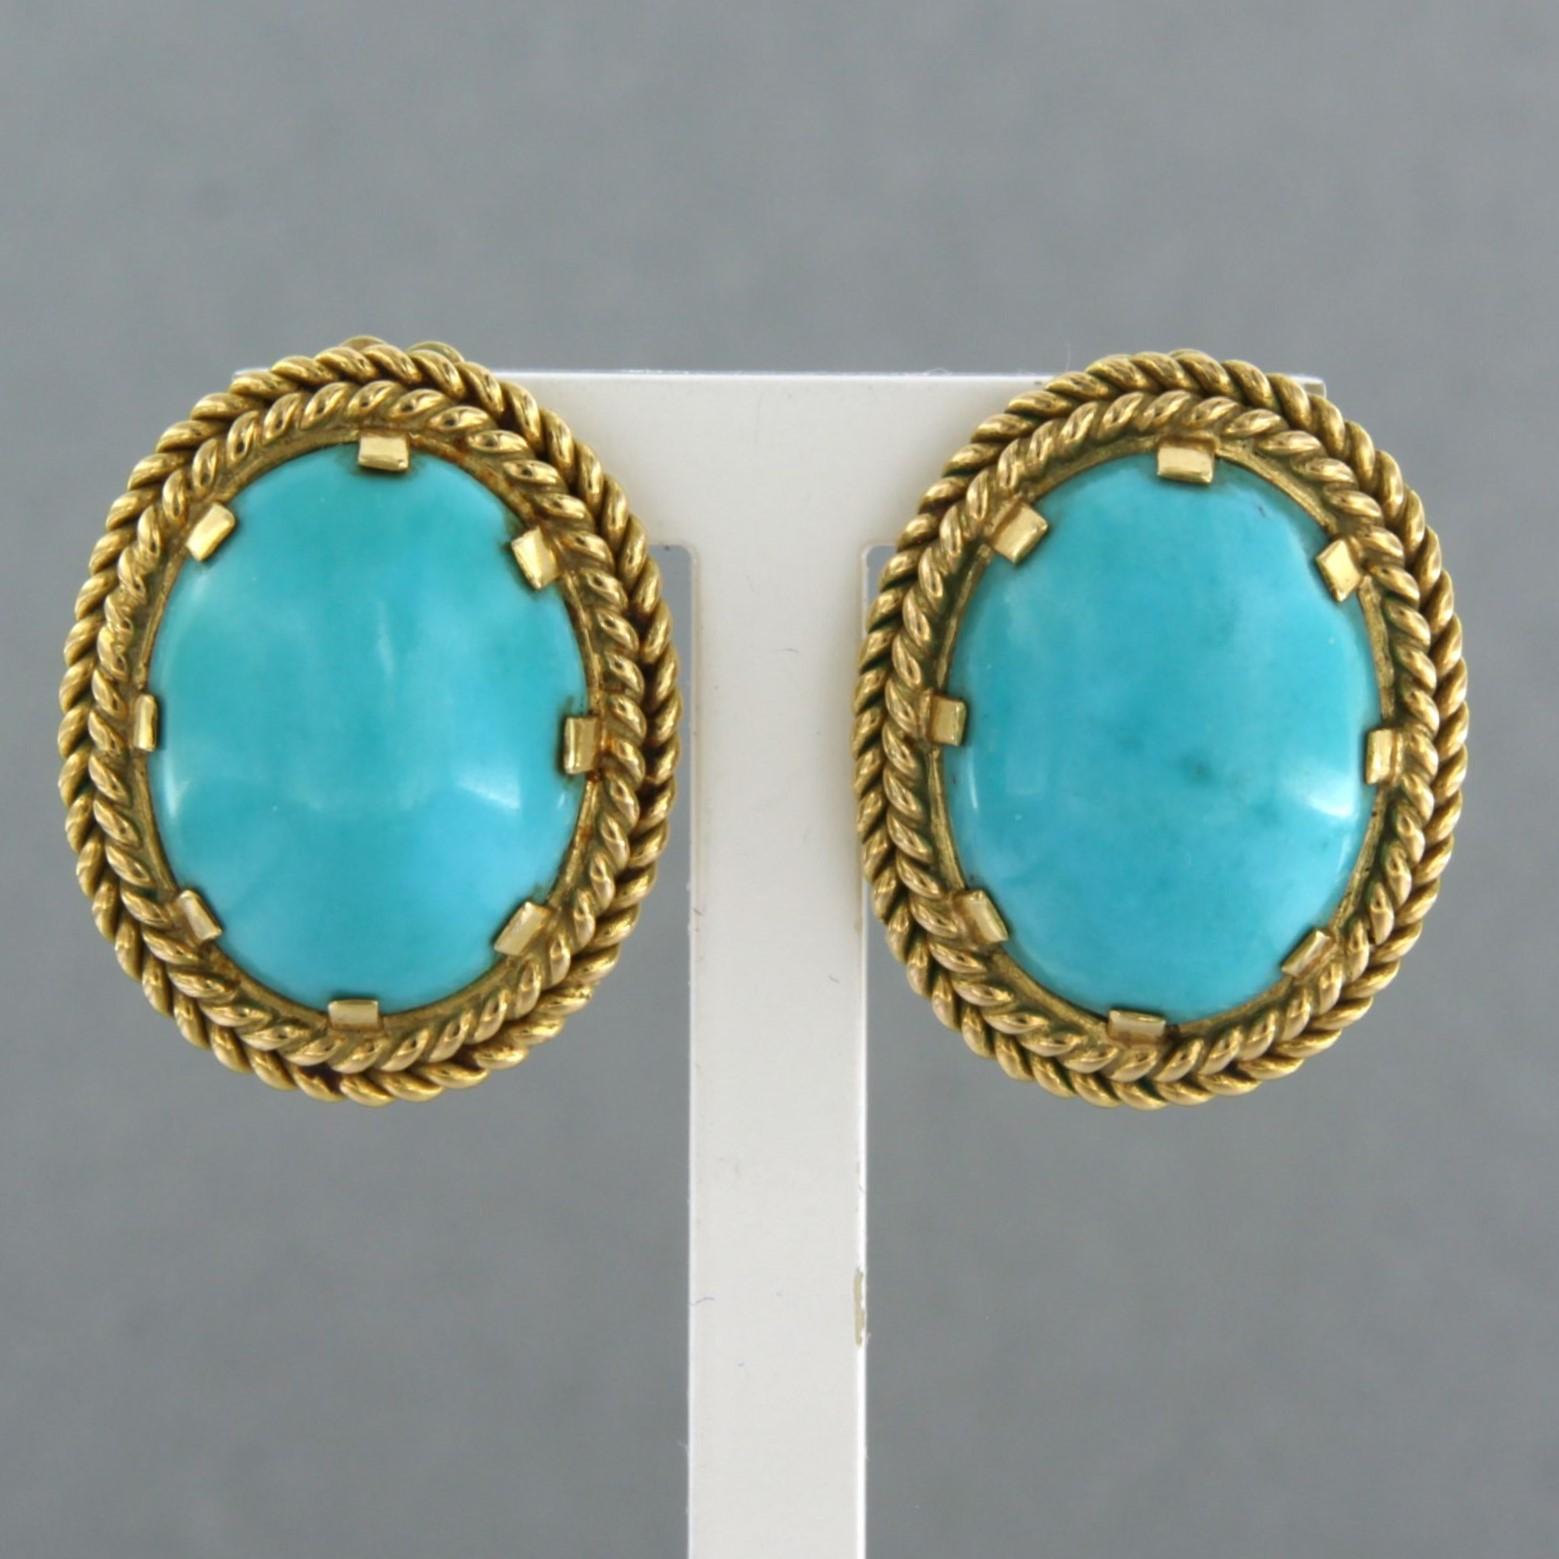 18k yellow gold earrings set with Turquoise

Detailed description:

the size of the earring is 2.1 cm long by 1.7 cm wide

weight 13.0 grams

occupied with

- 2 x 1.5 cm x 1.2 mm oval cabochon cut turquoise

color blue
clarity n/a
Gemstones have